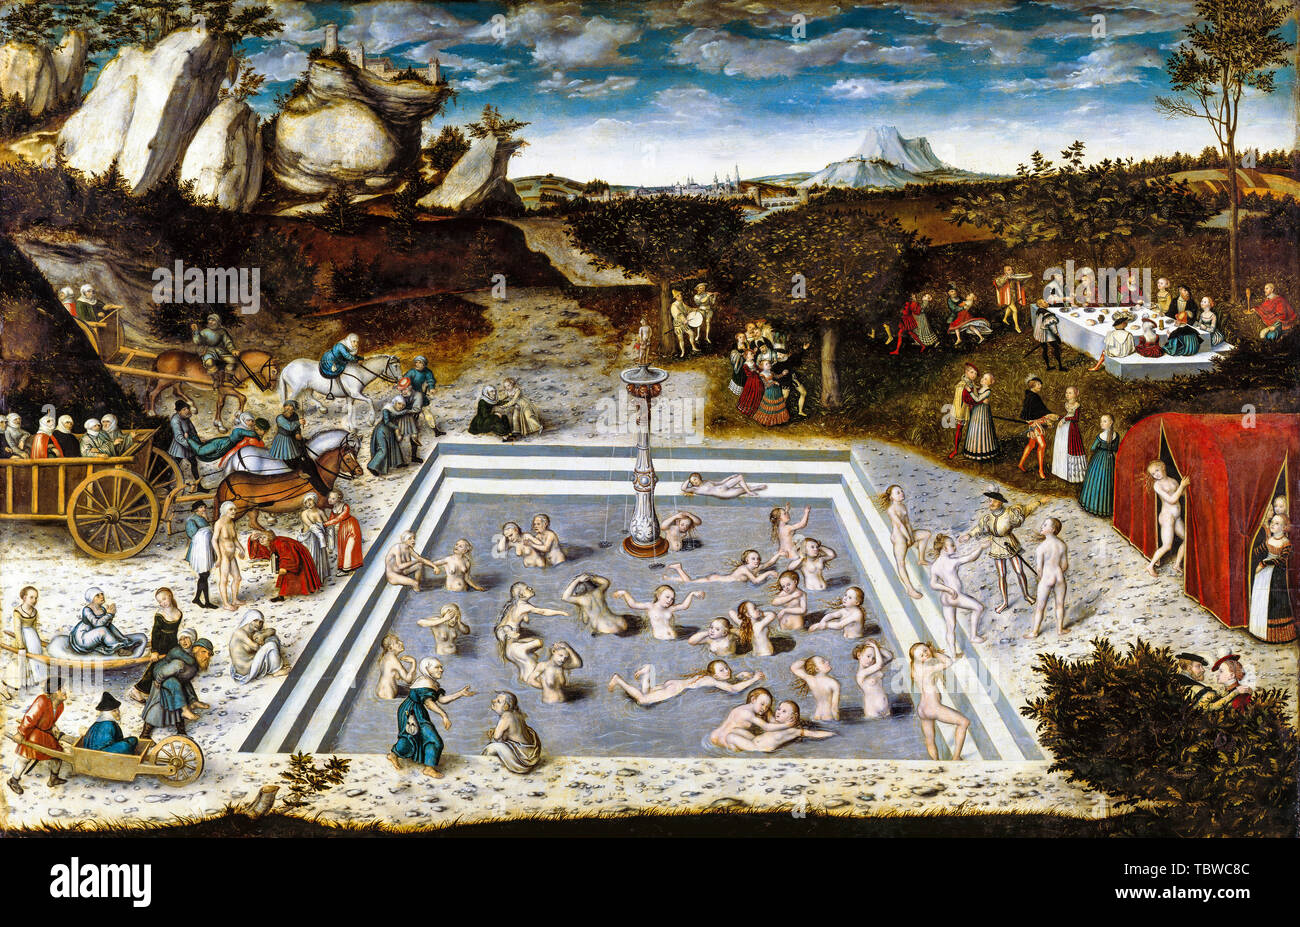 Lucas Cranach the Elder, The Fountain of Youth, painting, 1546 Stock Photo